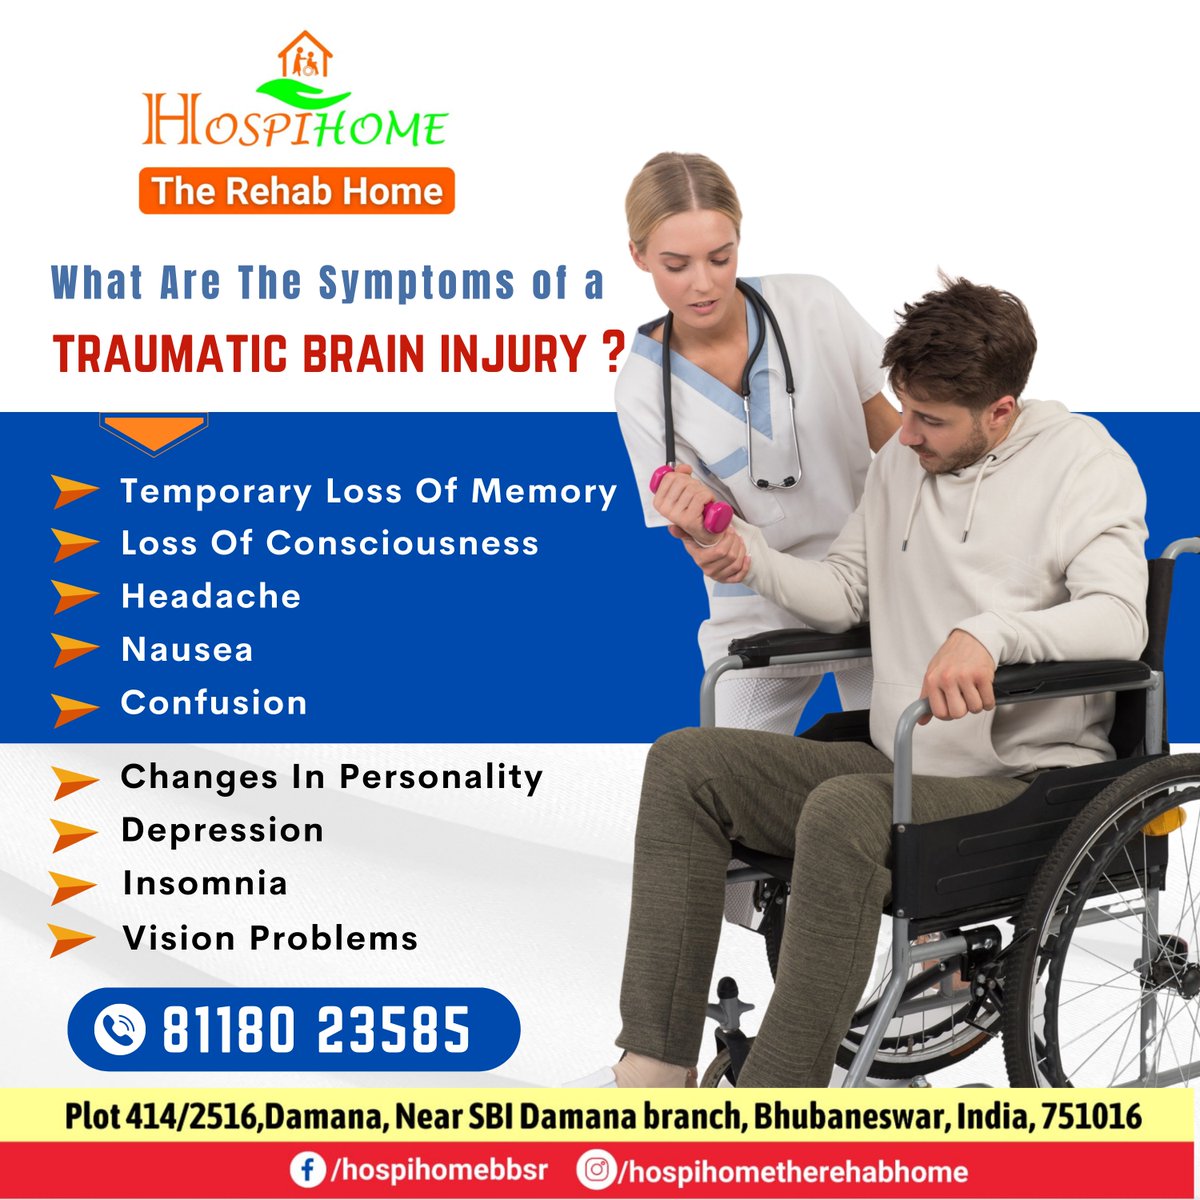 Traumatic brain injury symptoms
Visit us on hospihomes.com for rehab care of traumatic brain injury patient
#traumaticbraininjury #braininjury #rehabilitation #rehabcare #patientcare #recovery #wemakeitpossible #specialcare #therapy #Bhubaneswar #Odisha